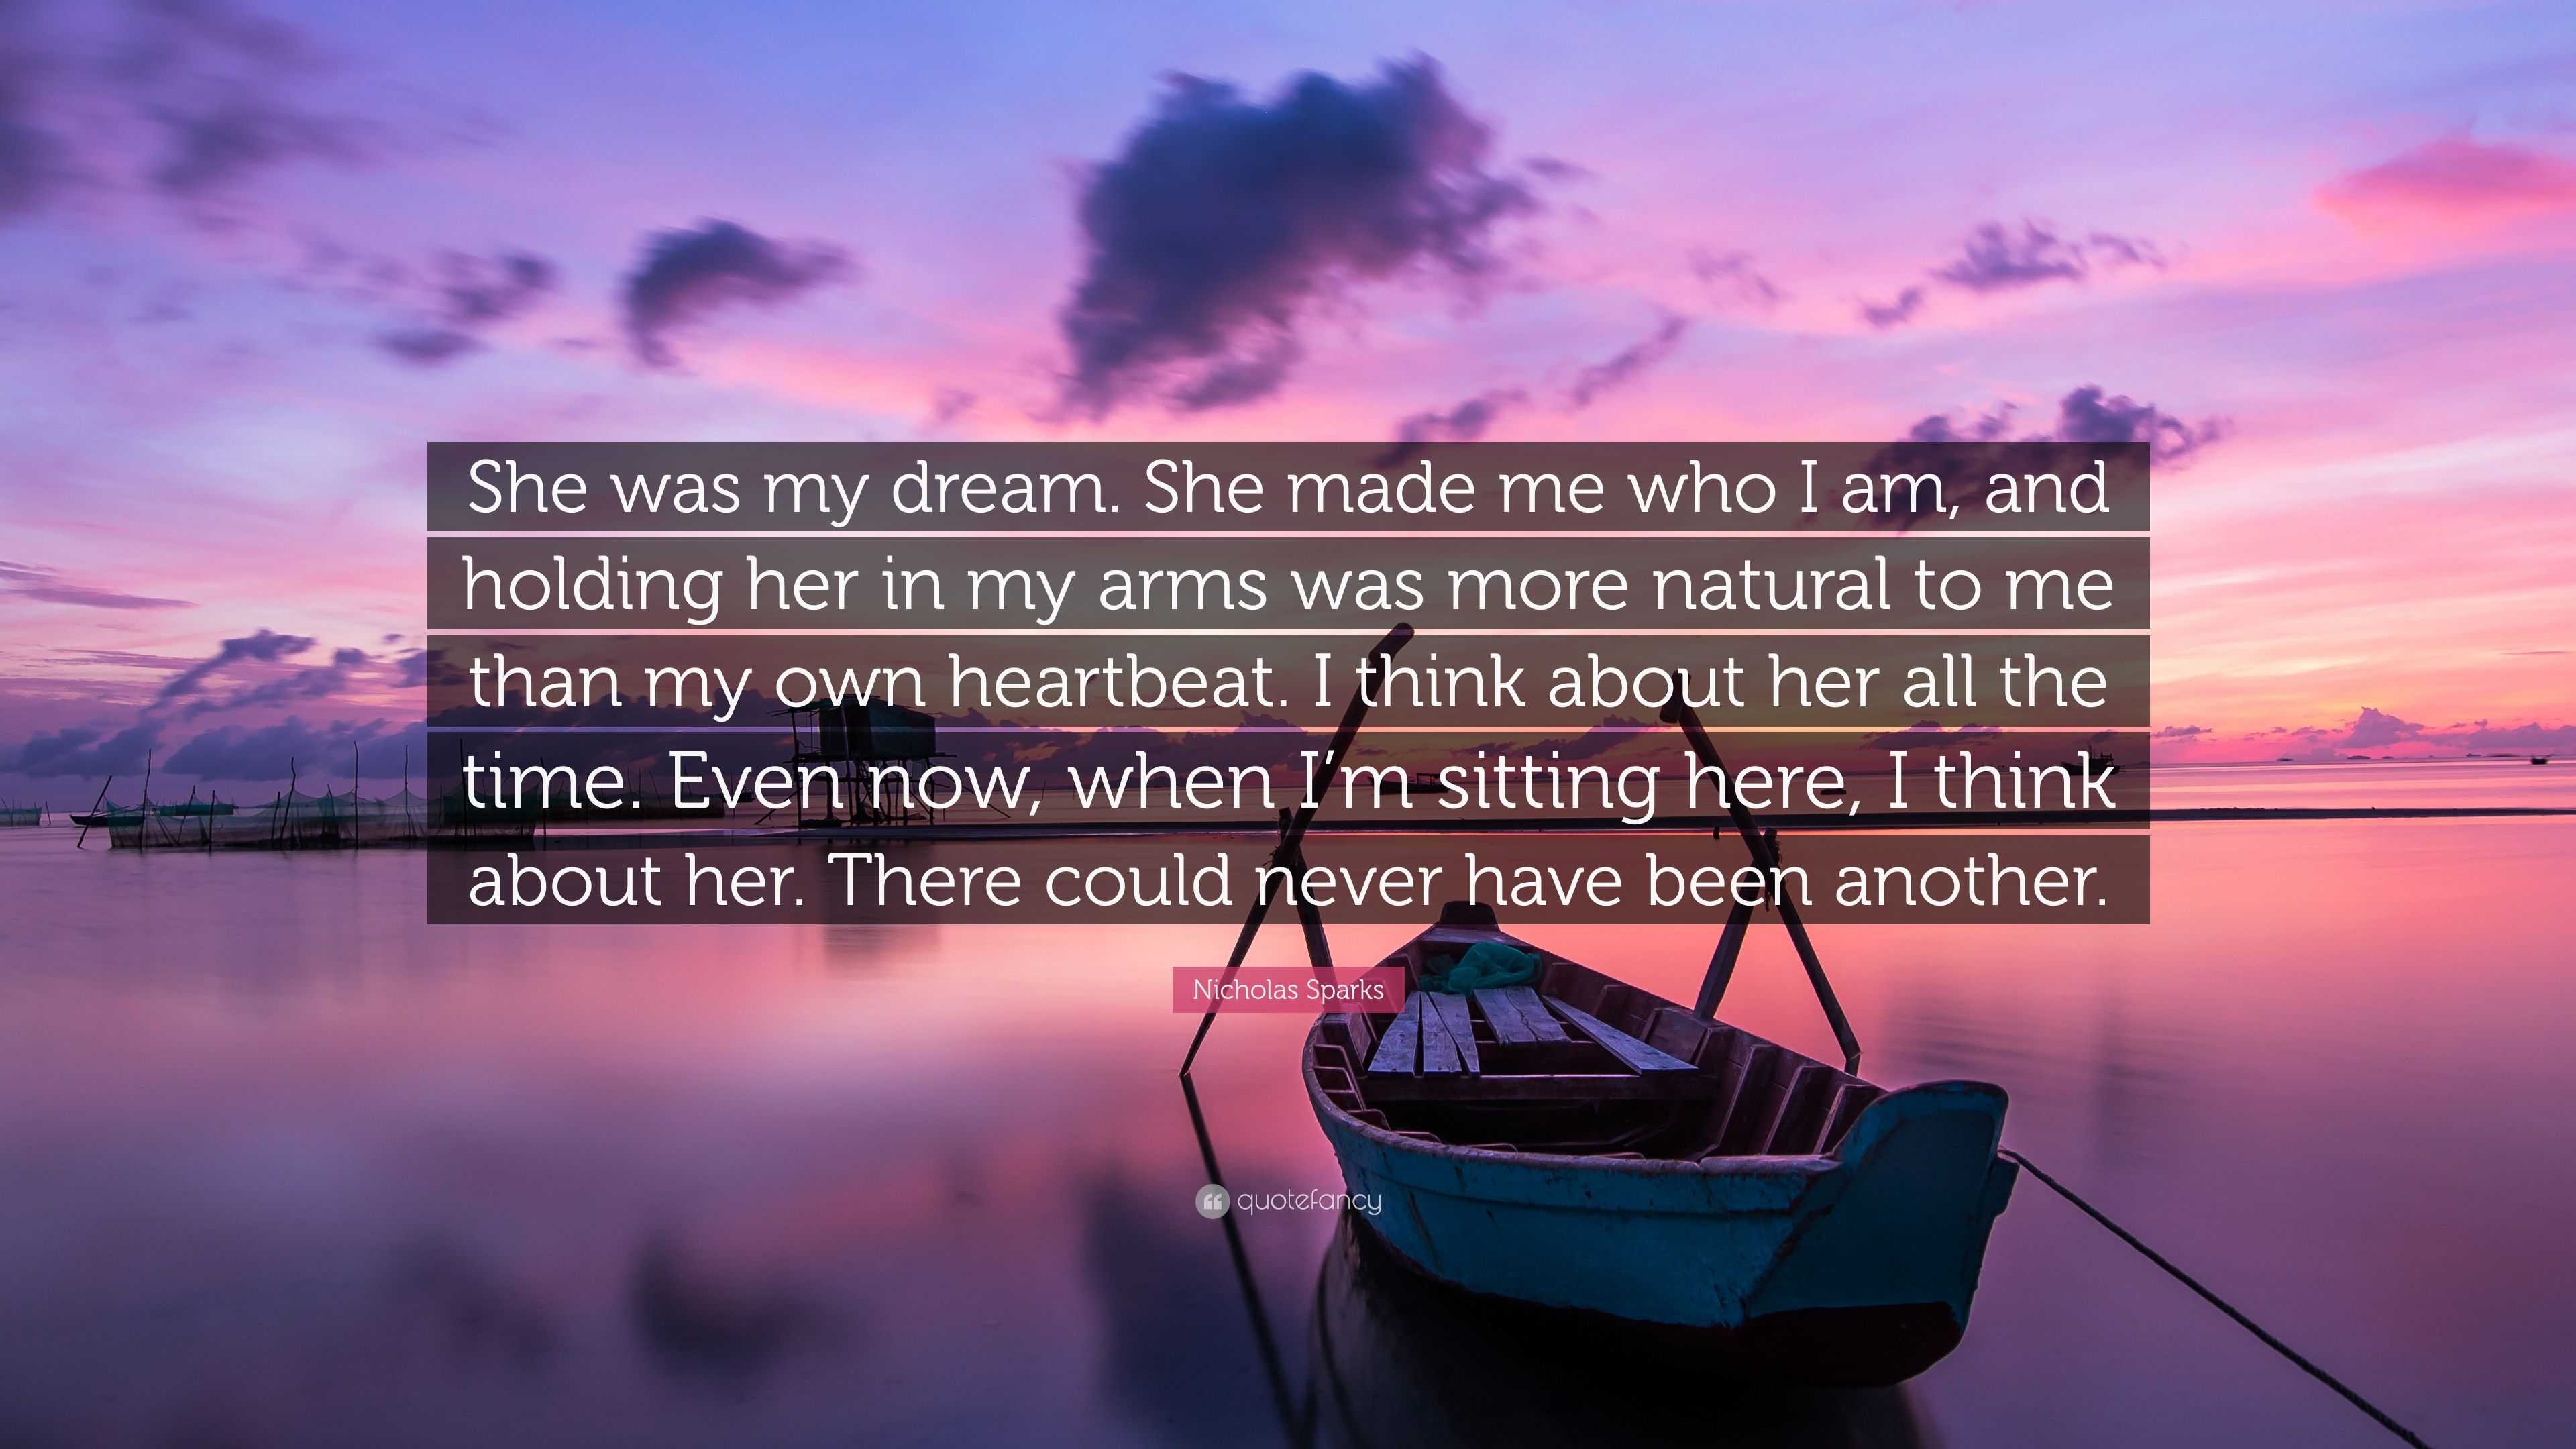 Nicholas Sparks Quote: “She was my dream. She made me who I am, and ...